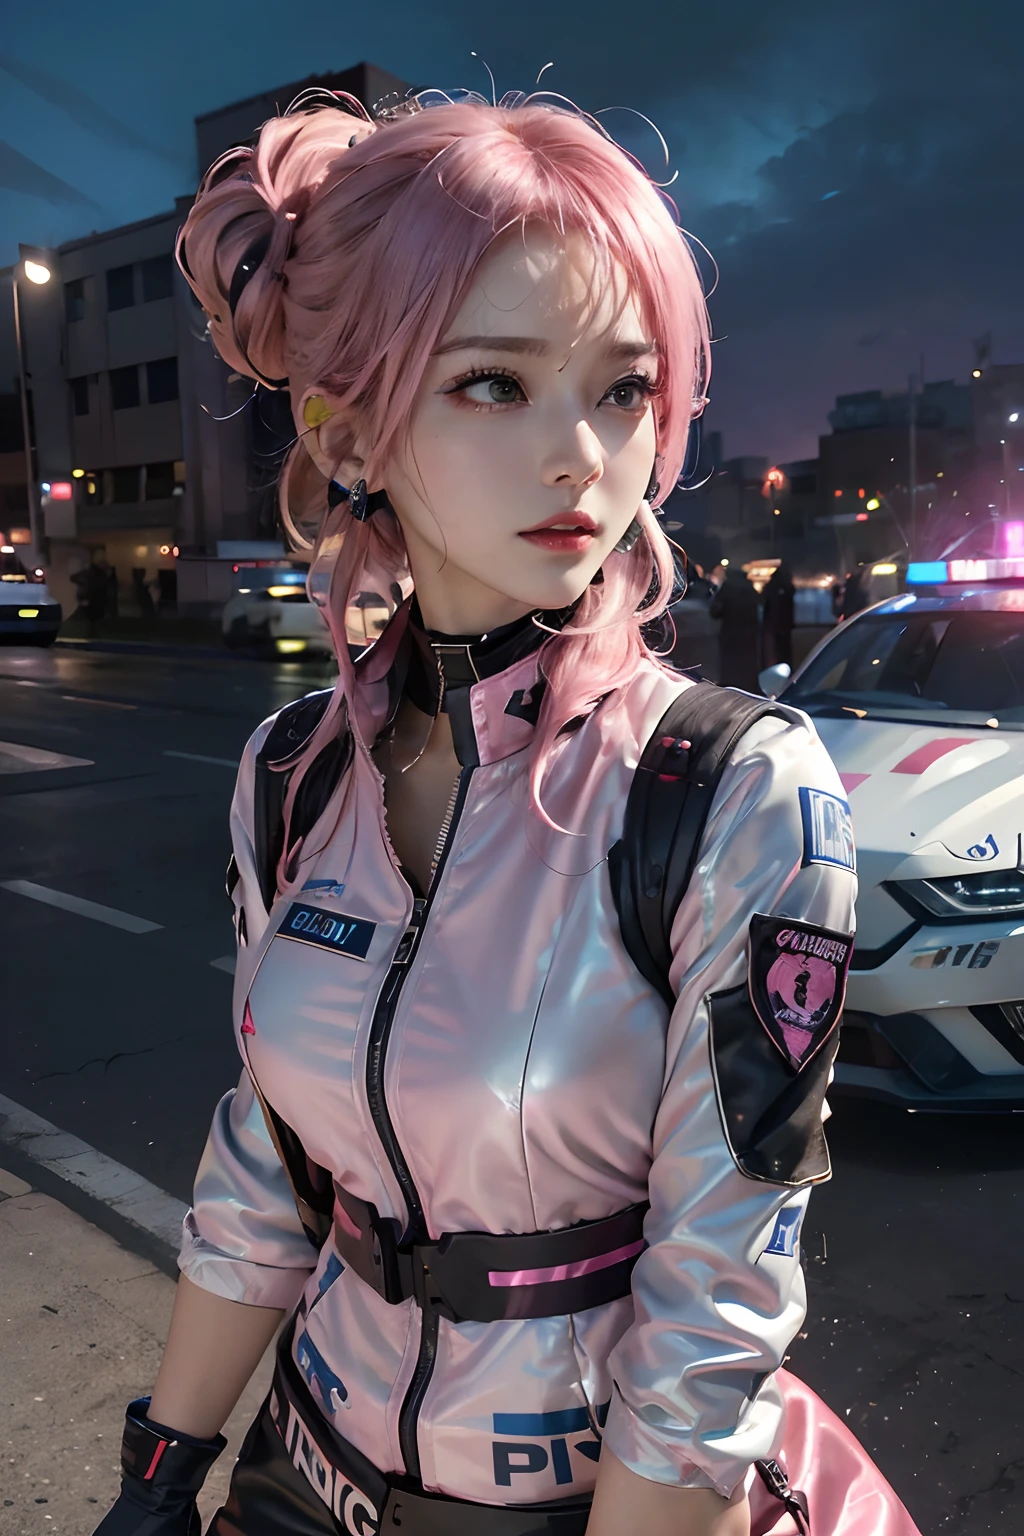 Top Quality, Ultra High Definition, (backlight), (Photorealistic: 1.4), (Pink updo Hair: 1.3), 1 Girl, (Kpop Idol), Detailed Face, Contrapposto, Smooth Skin, Perfect Anatomy, Cityscape, Professional Lighting, ((wearing Futuristic Racing Suits like Police uniform, police wappen, High-tech Headset, military harness, racing gloves, machinegun)), ("POLICE", pink hair,), (background, (Audience Coming close), crashed cars, fire, (Explosion),